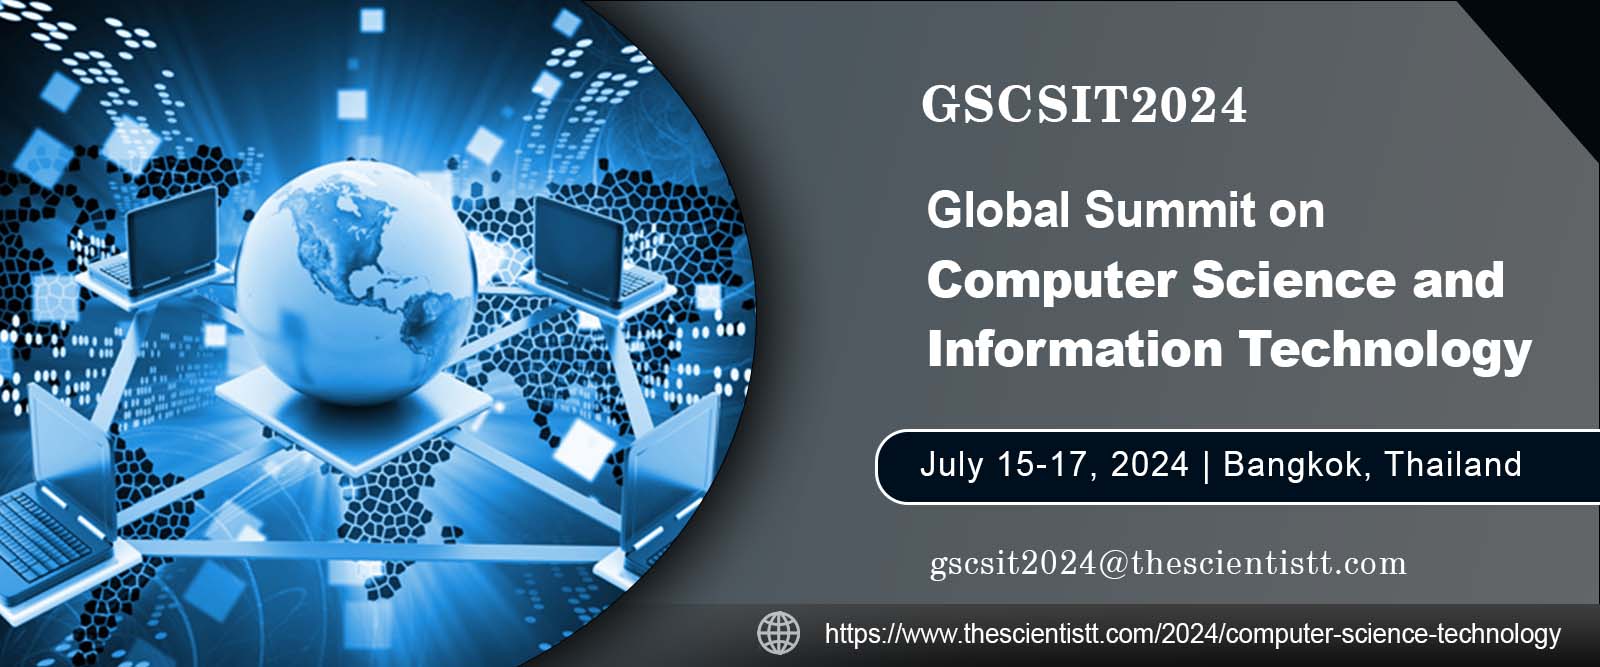 Global Summit on Computer Science and Information Technology (GSCSIT2024), Bangkok, Thailand